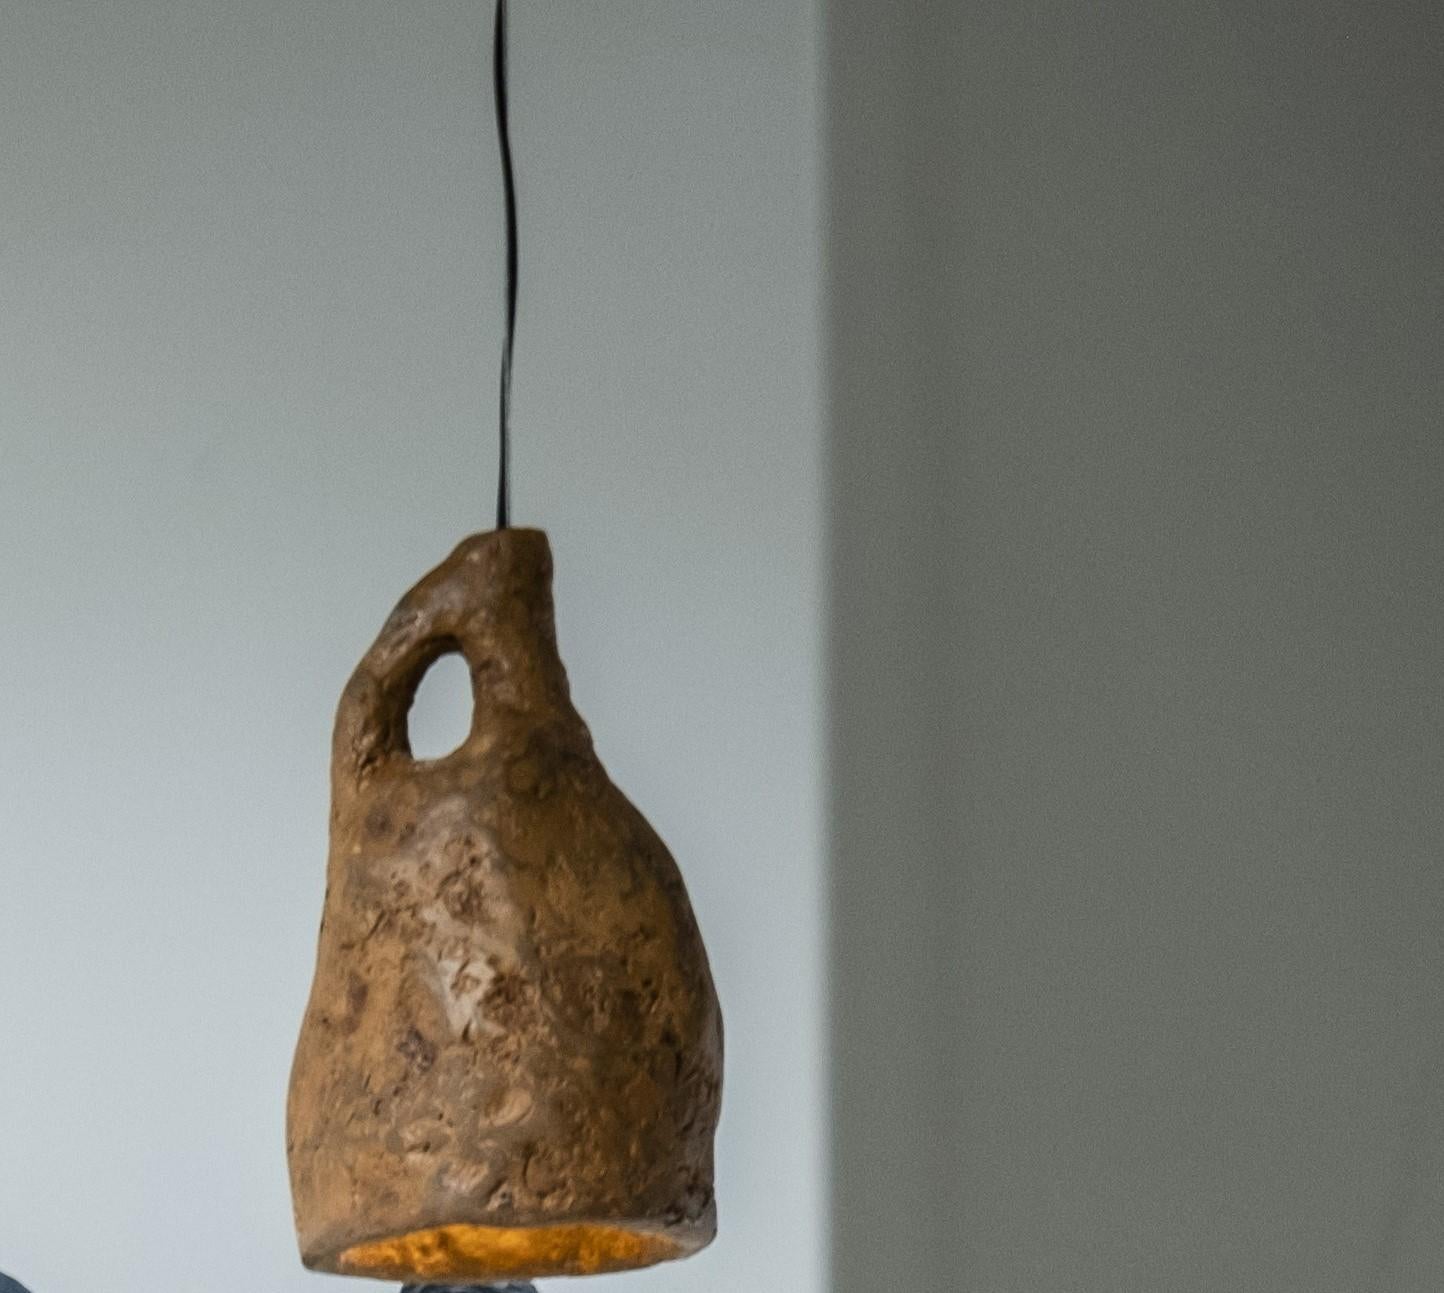 Dual Terra Lamp by Willem Van Hooff
Dimensions: W 27 x D 27 x H 45 cm (Dimensions may vary as pieces are hand-made and might present slight variations in sizes)
Materials: Air Dry Clay

Willem van Hooff is a designer based in Eindhoven. He is a